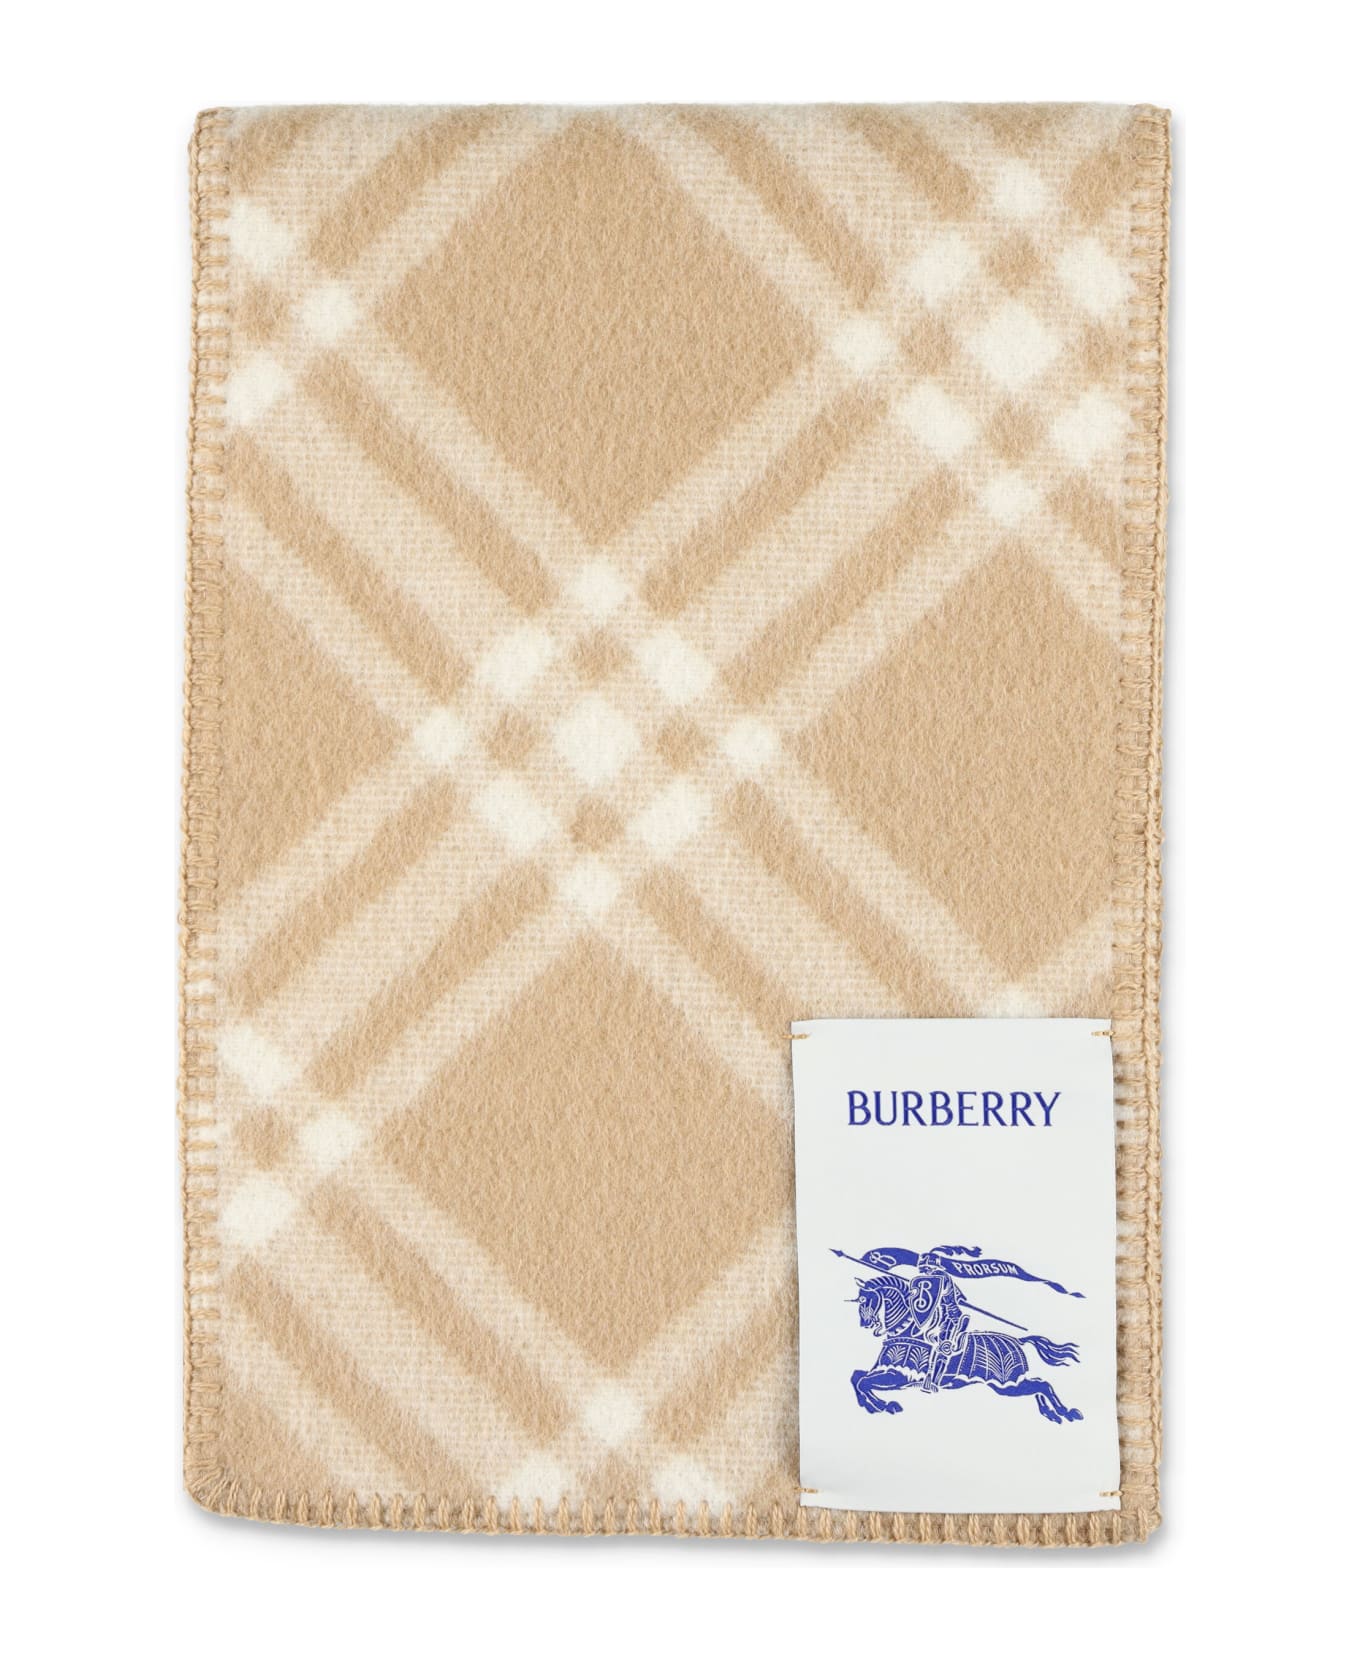 Burberry London Check Wool Scarf - ARCHIVE BEIGE CHECK